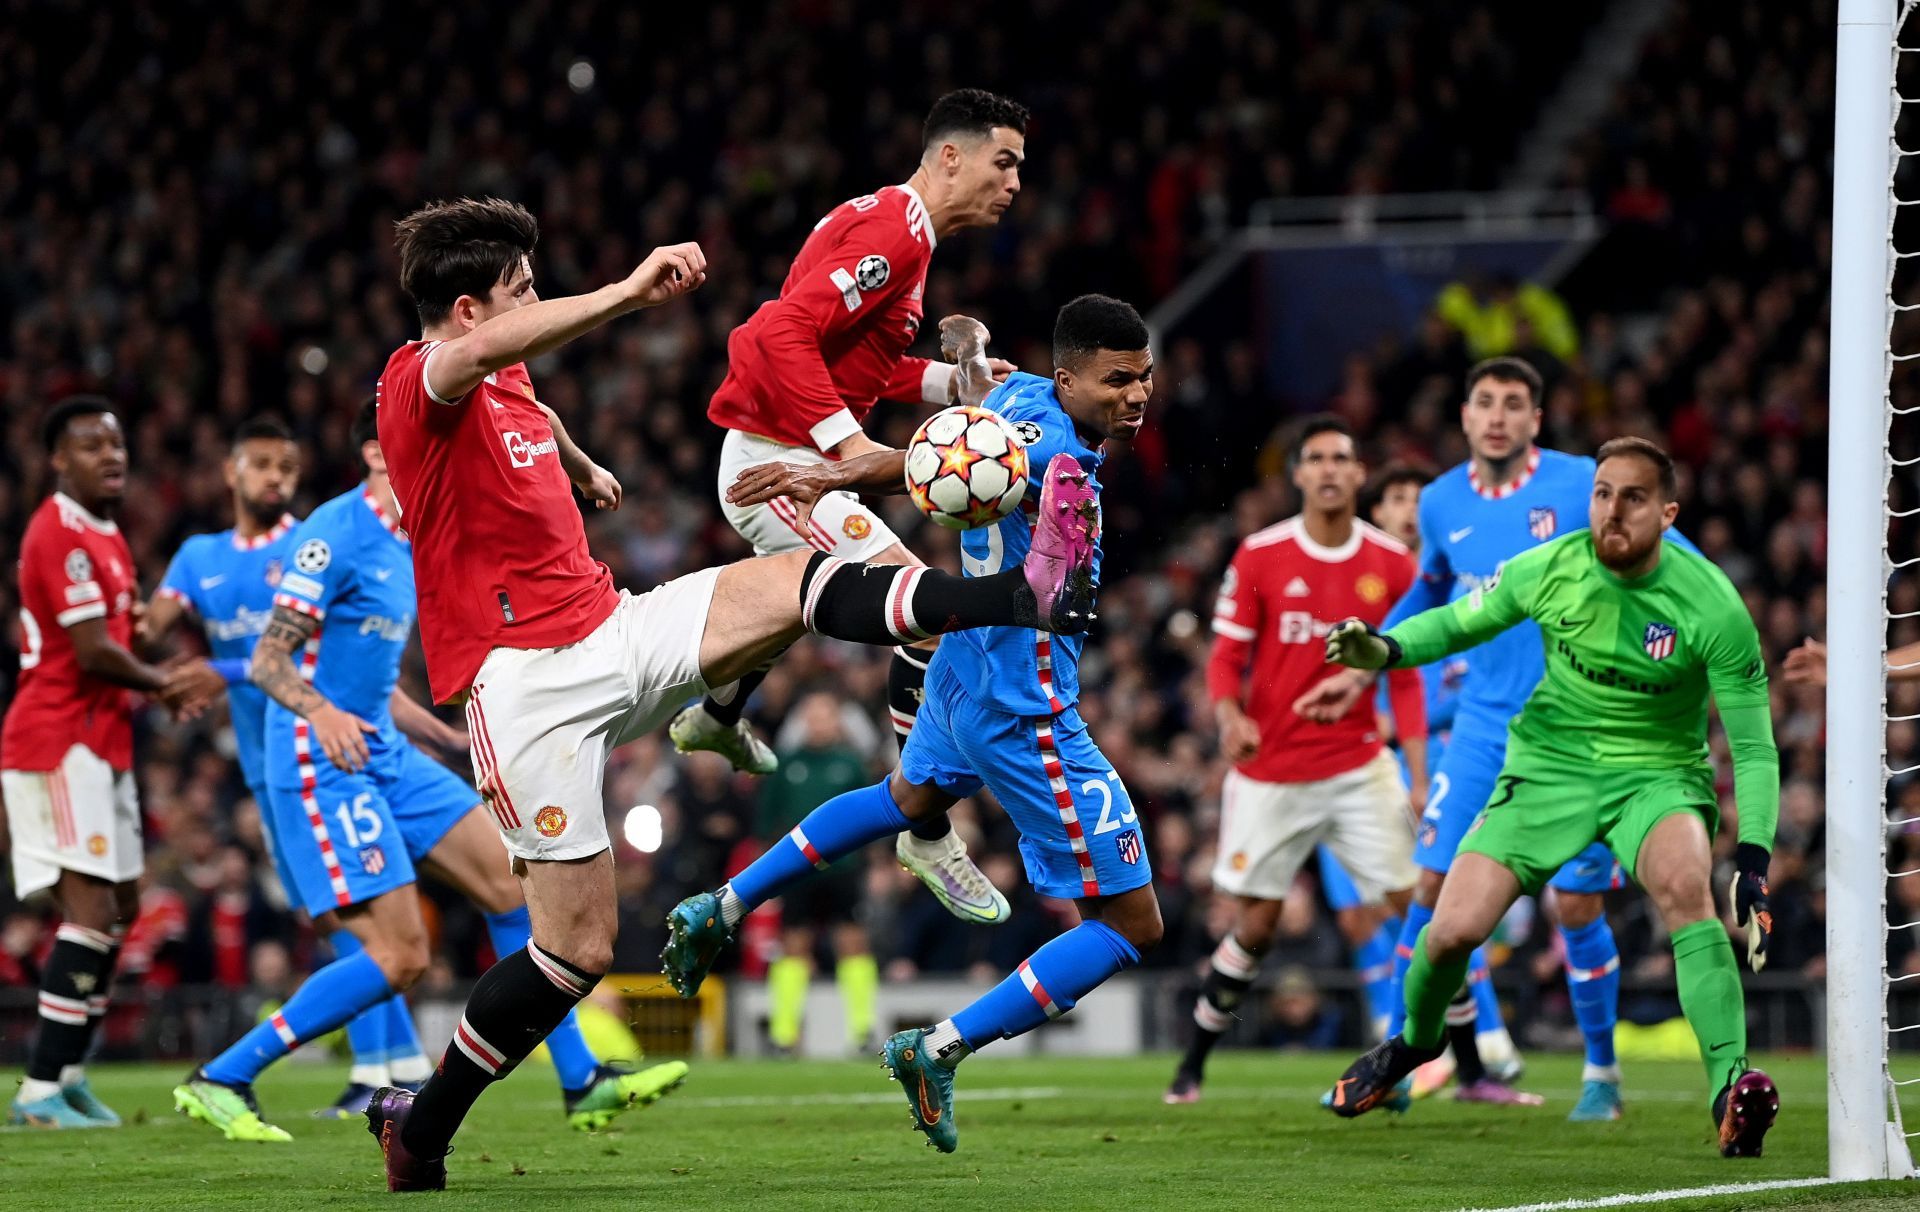 Manchester United were eliminated from the UEFA Champions League by Atletico Madrid